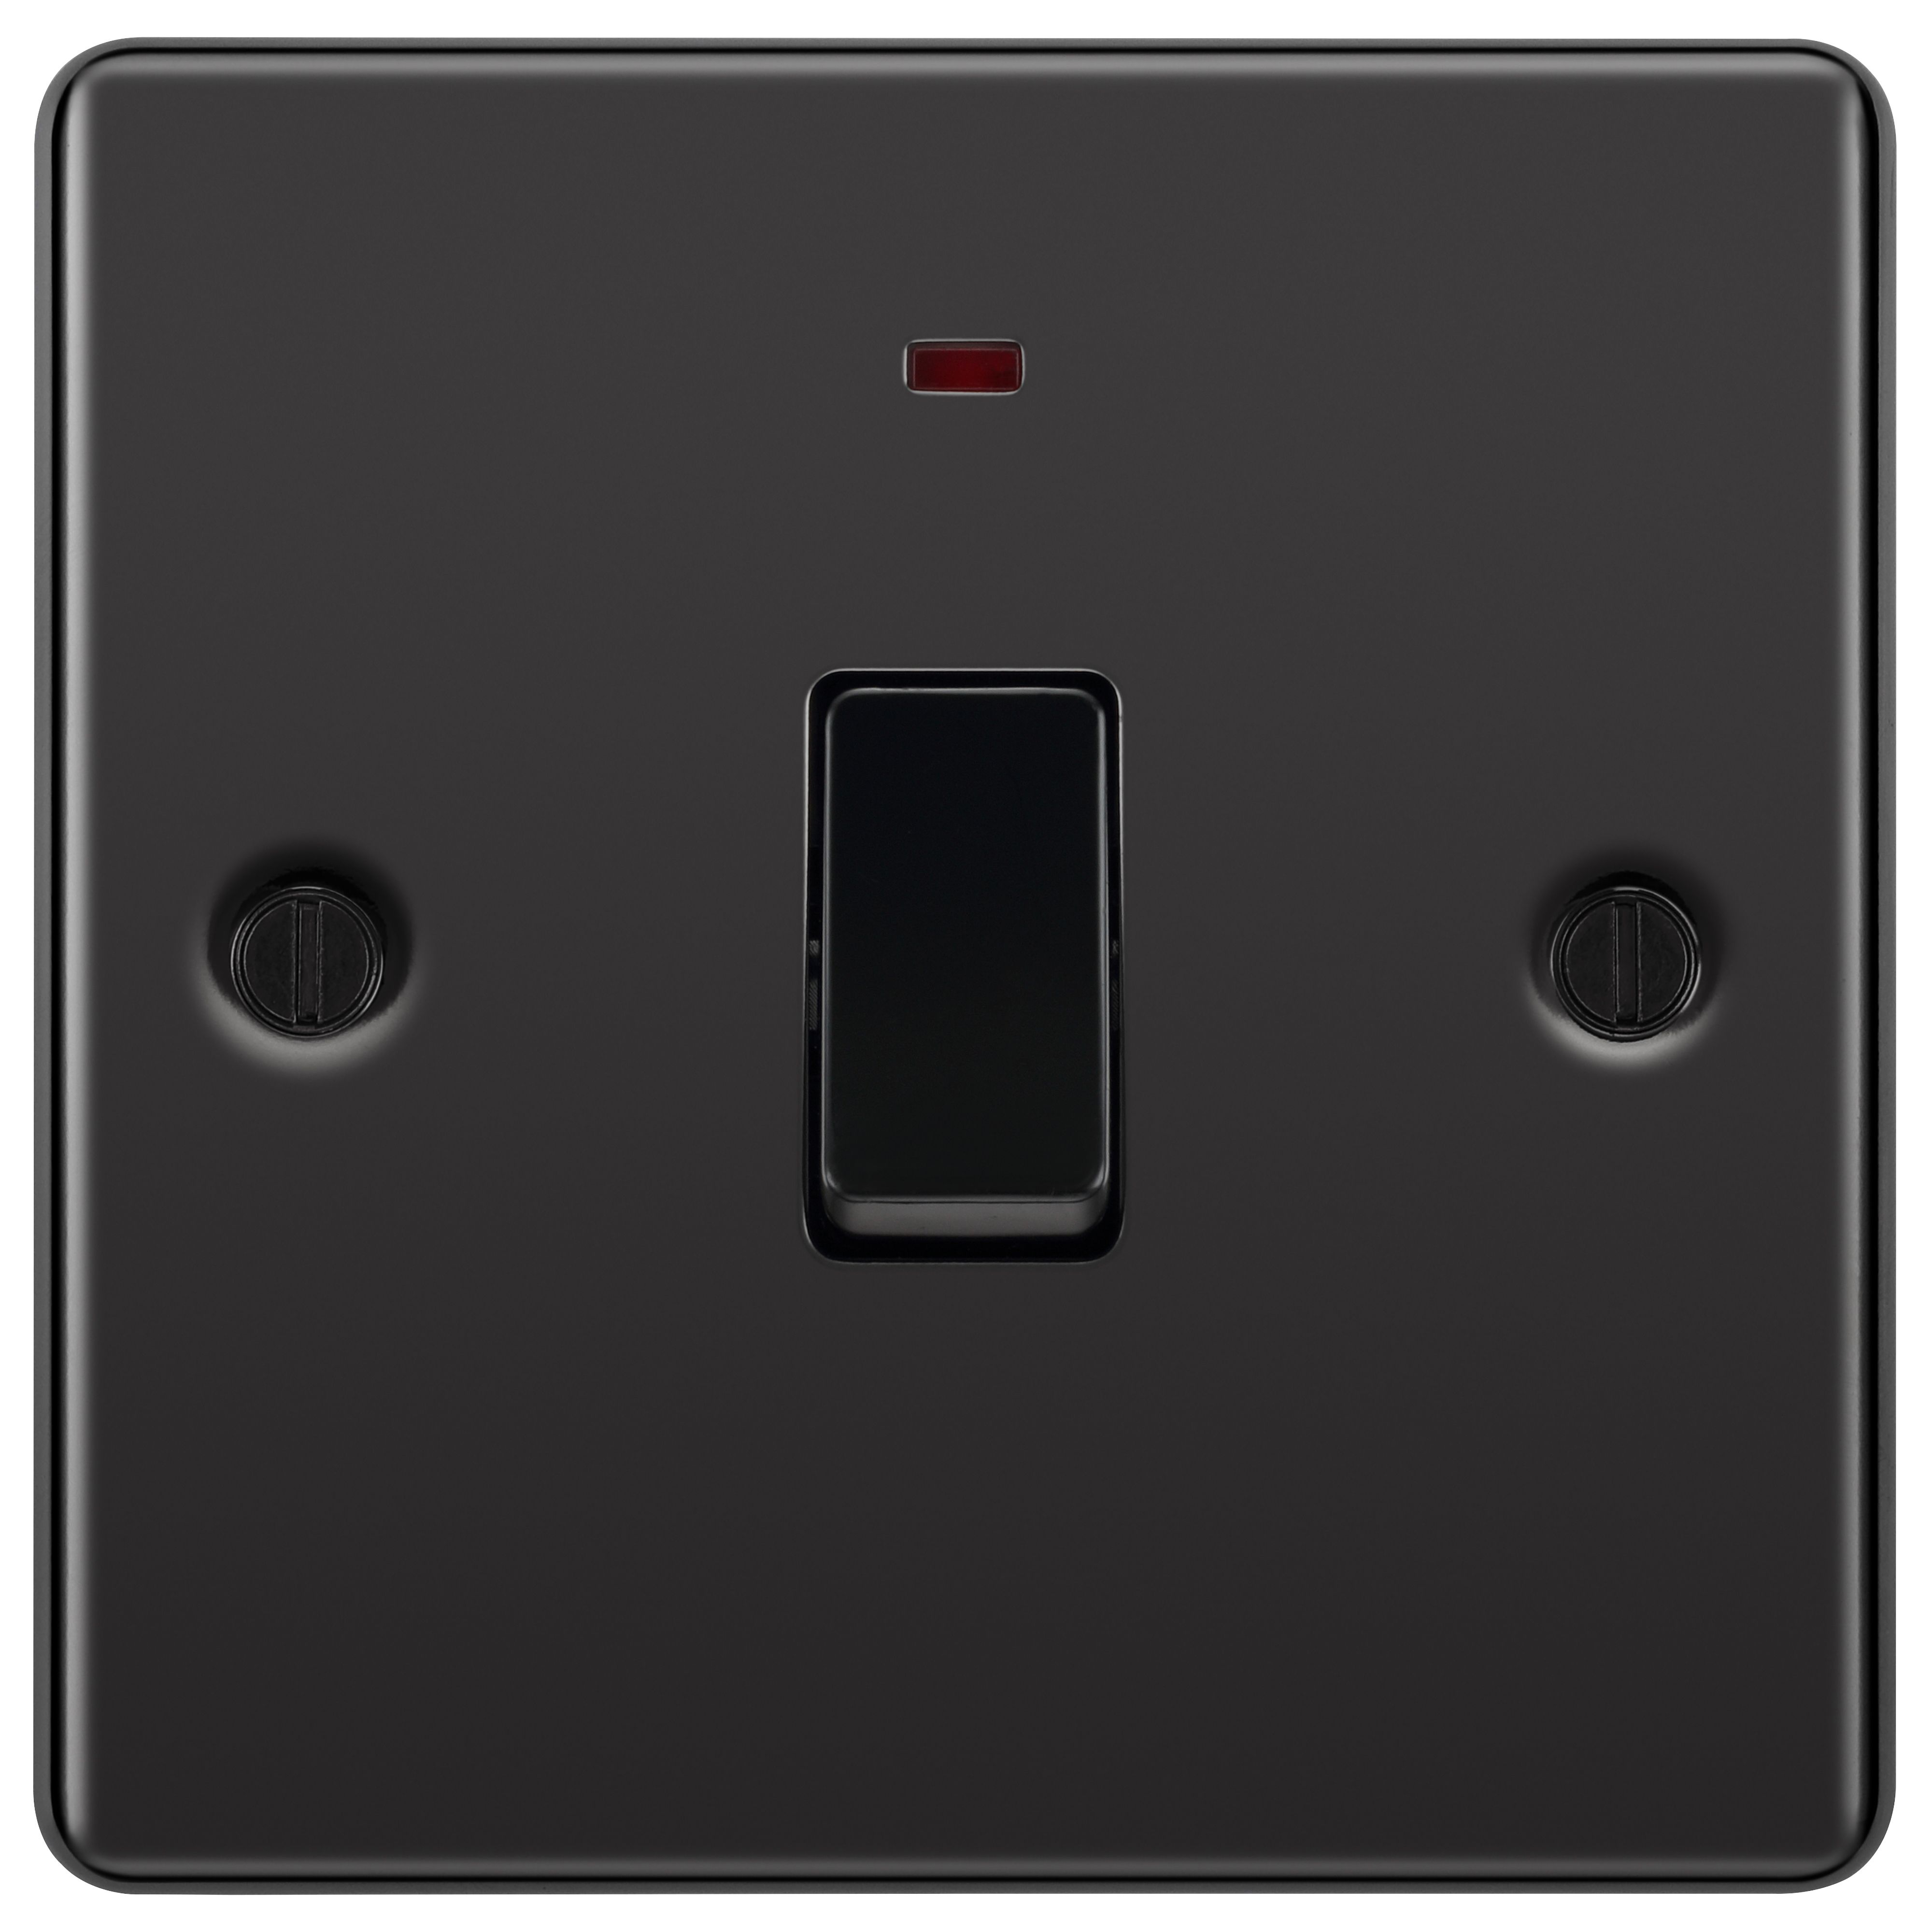 GoodHome 20A Rocker Raised rounded Control switch with LED indicator Black